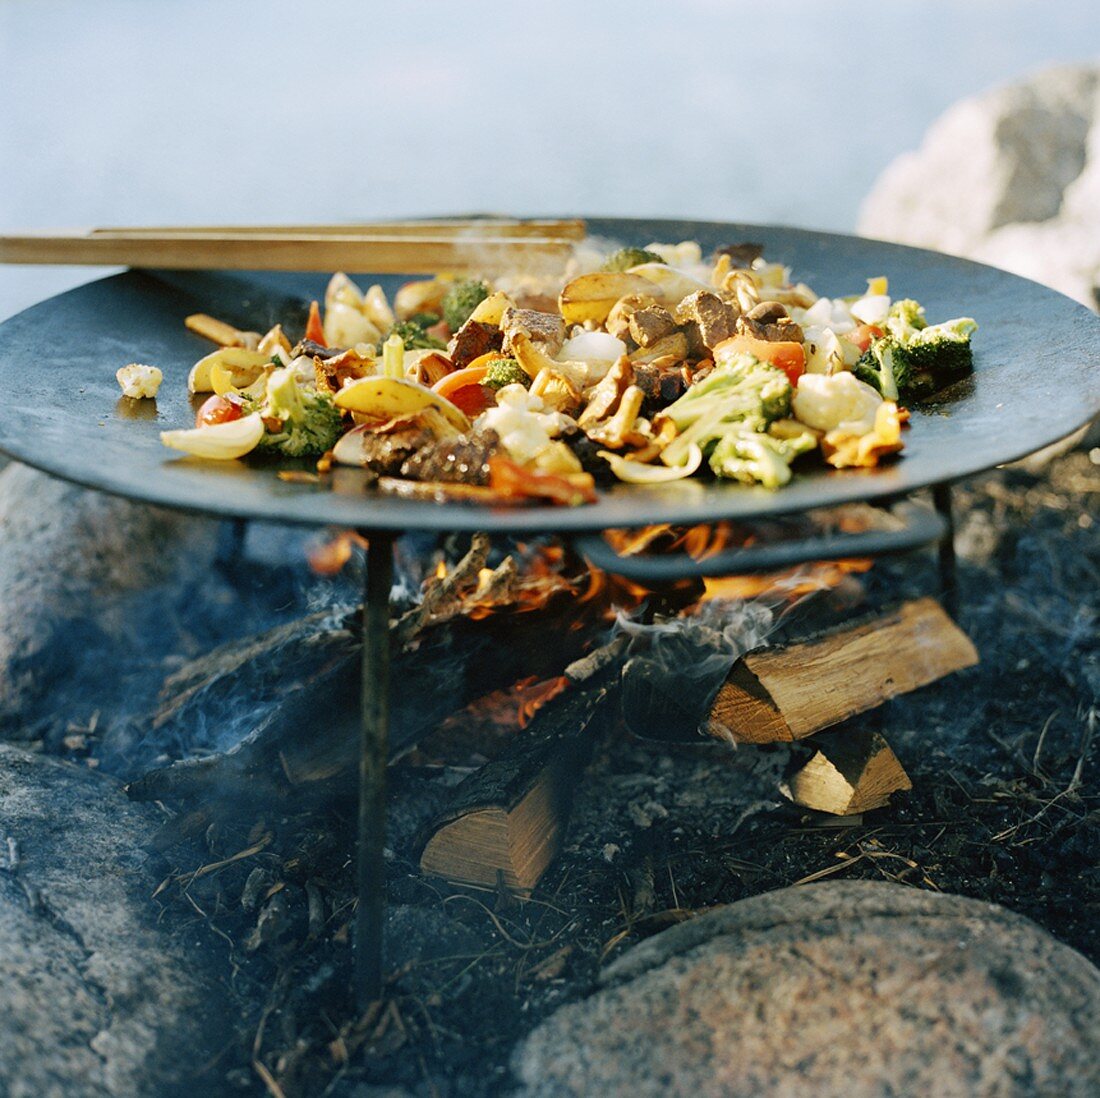 Meat and vegetables in wok on open fire